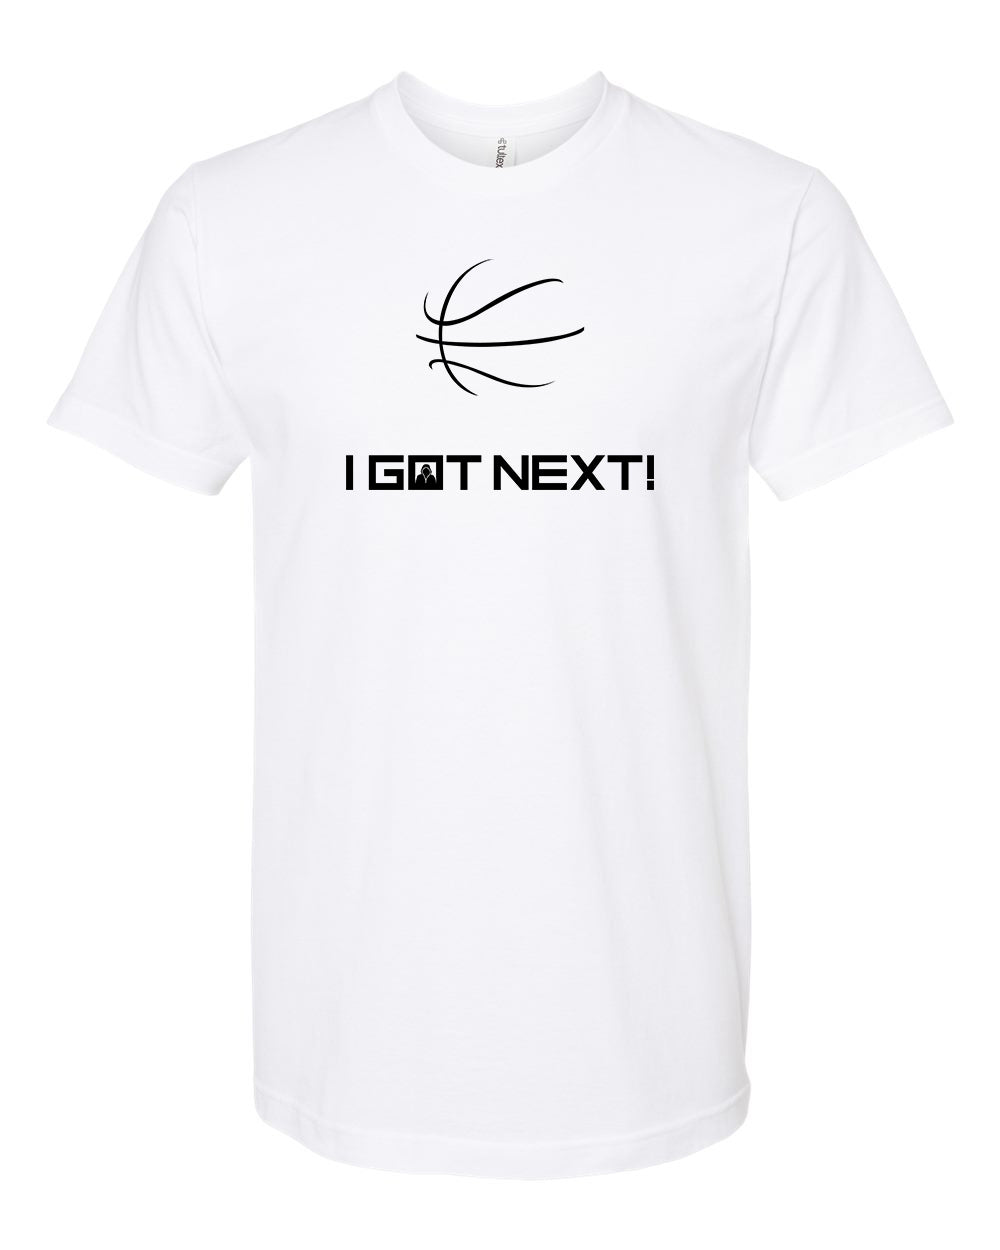 Disal Custom Adult Tee "I Got Next" - 202 (color options available)